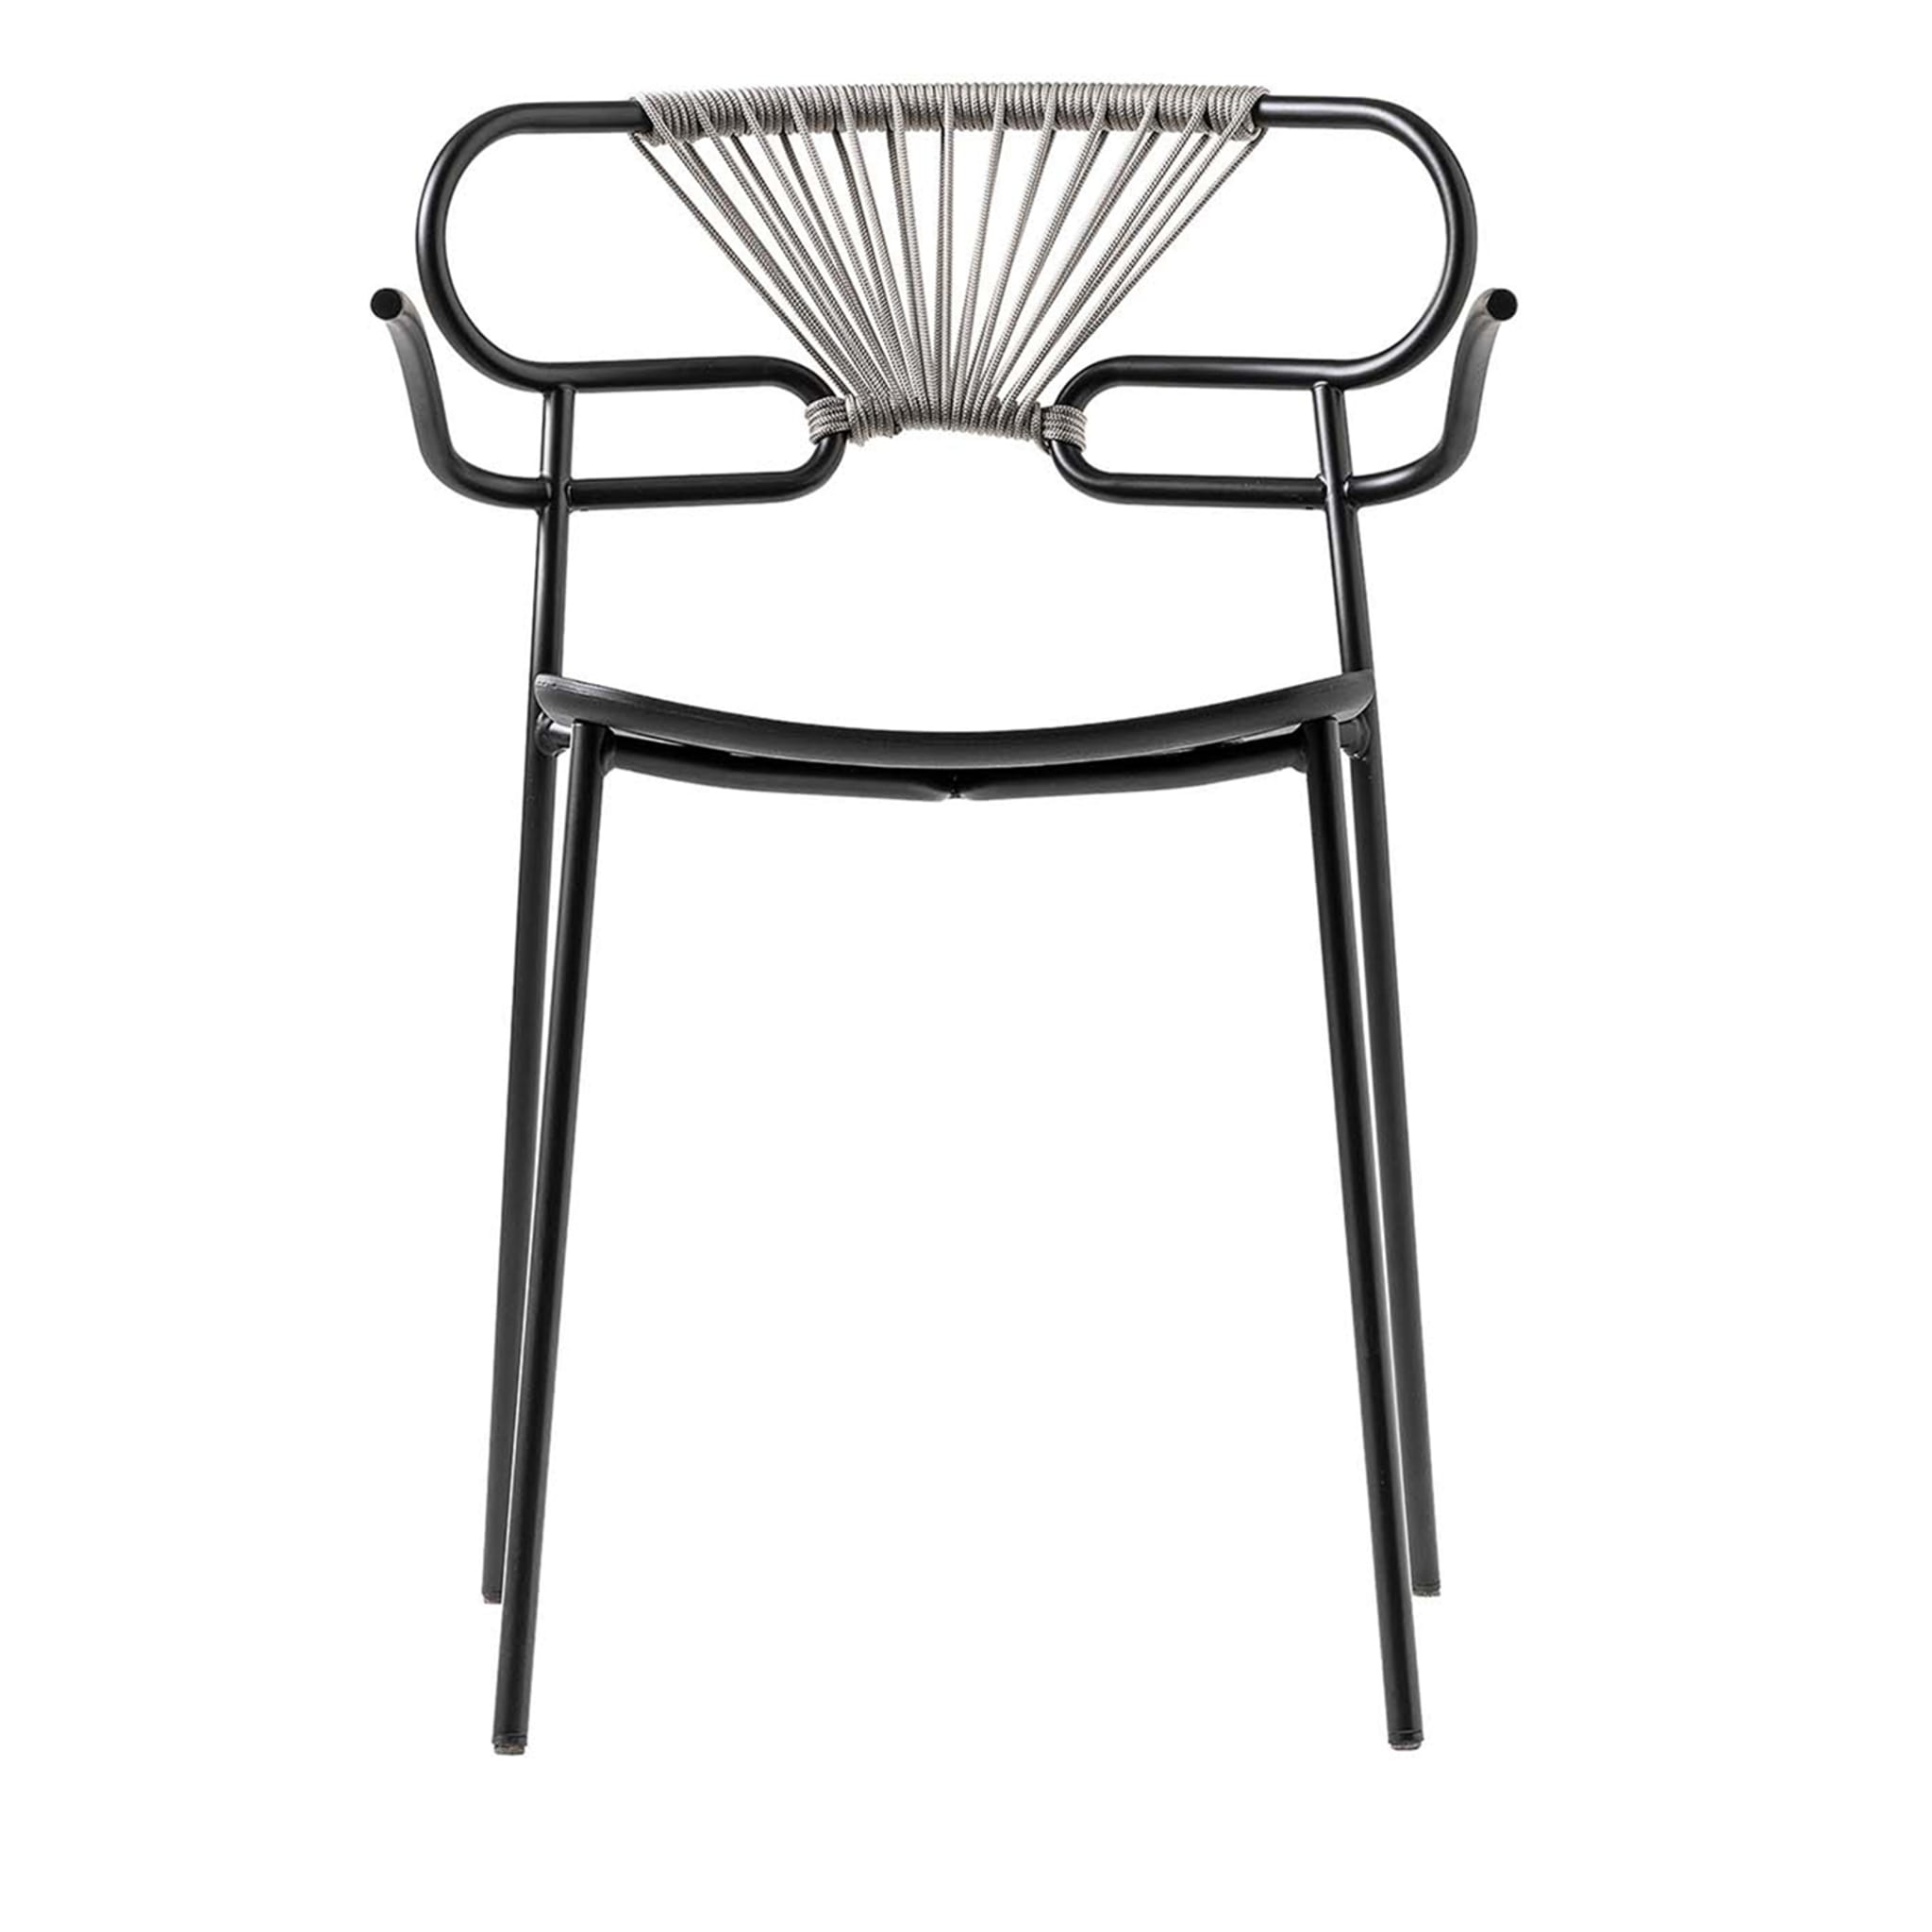 Genoa Black Chair by Cesare Ehr - Main view